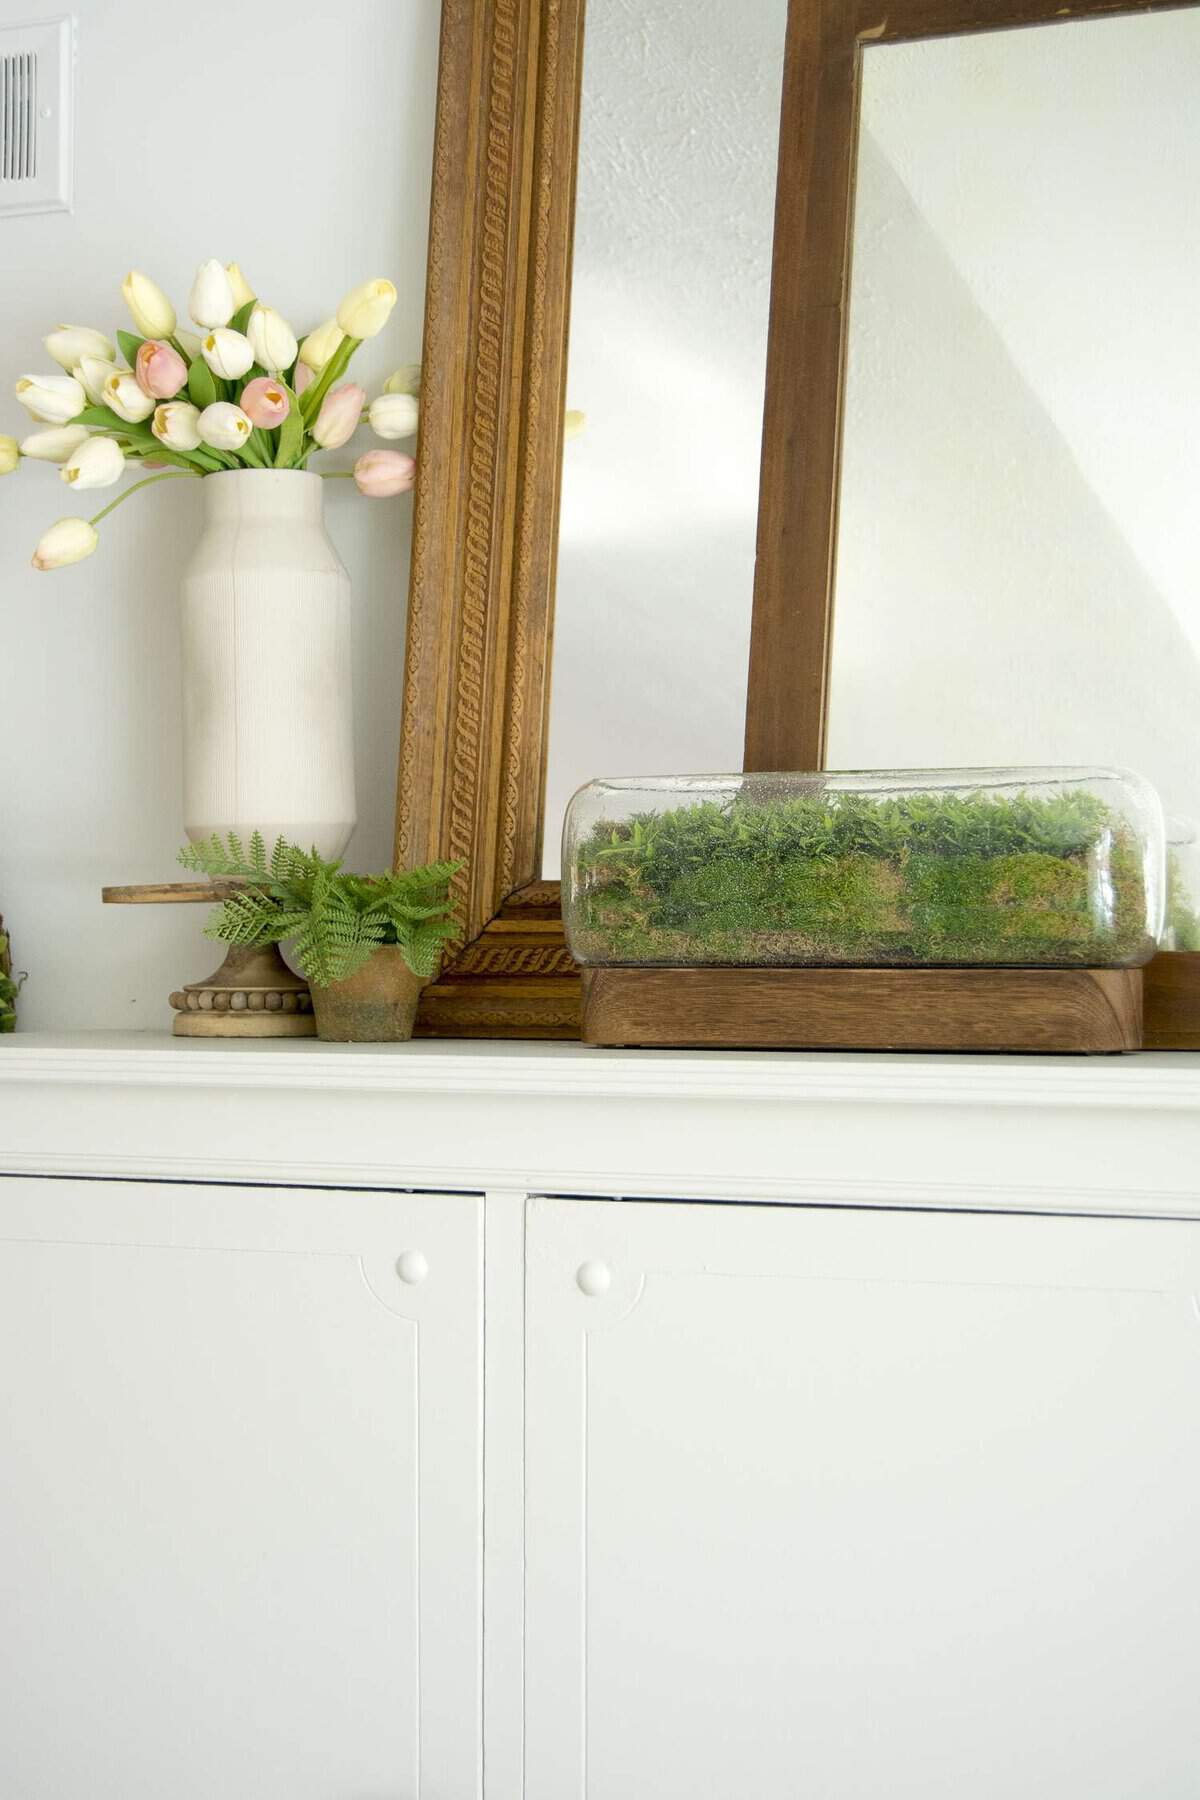 Do you love the look of terrariums? Try out this simple DIY faux terrarium! Brighten your home in less than 10 minutes with this easy tutorial. #fromhousetohaven #diyterrarium #fauxterrarium #plants